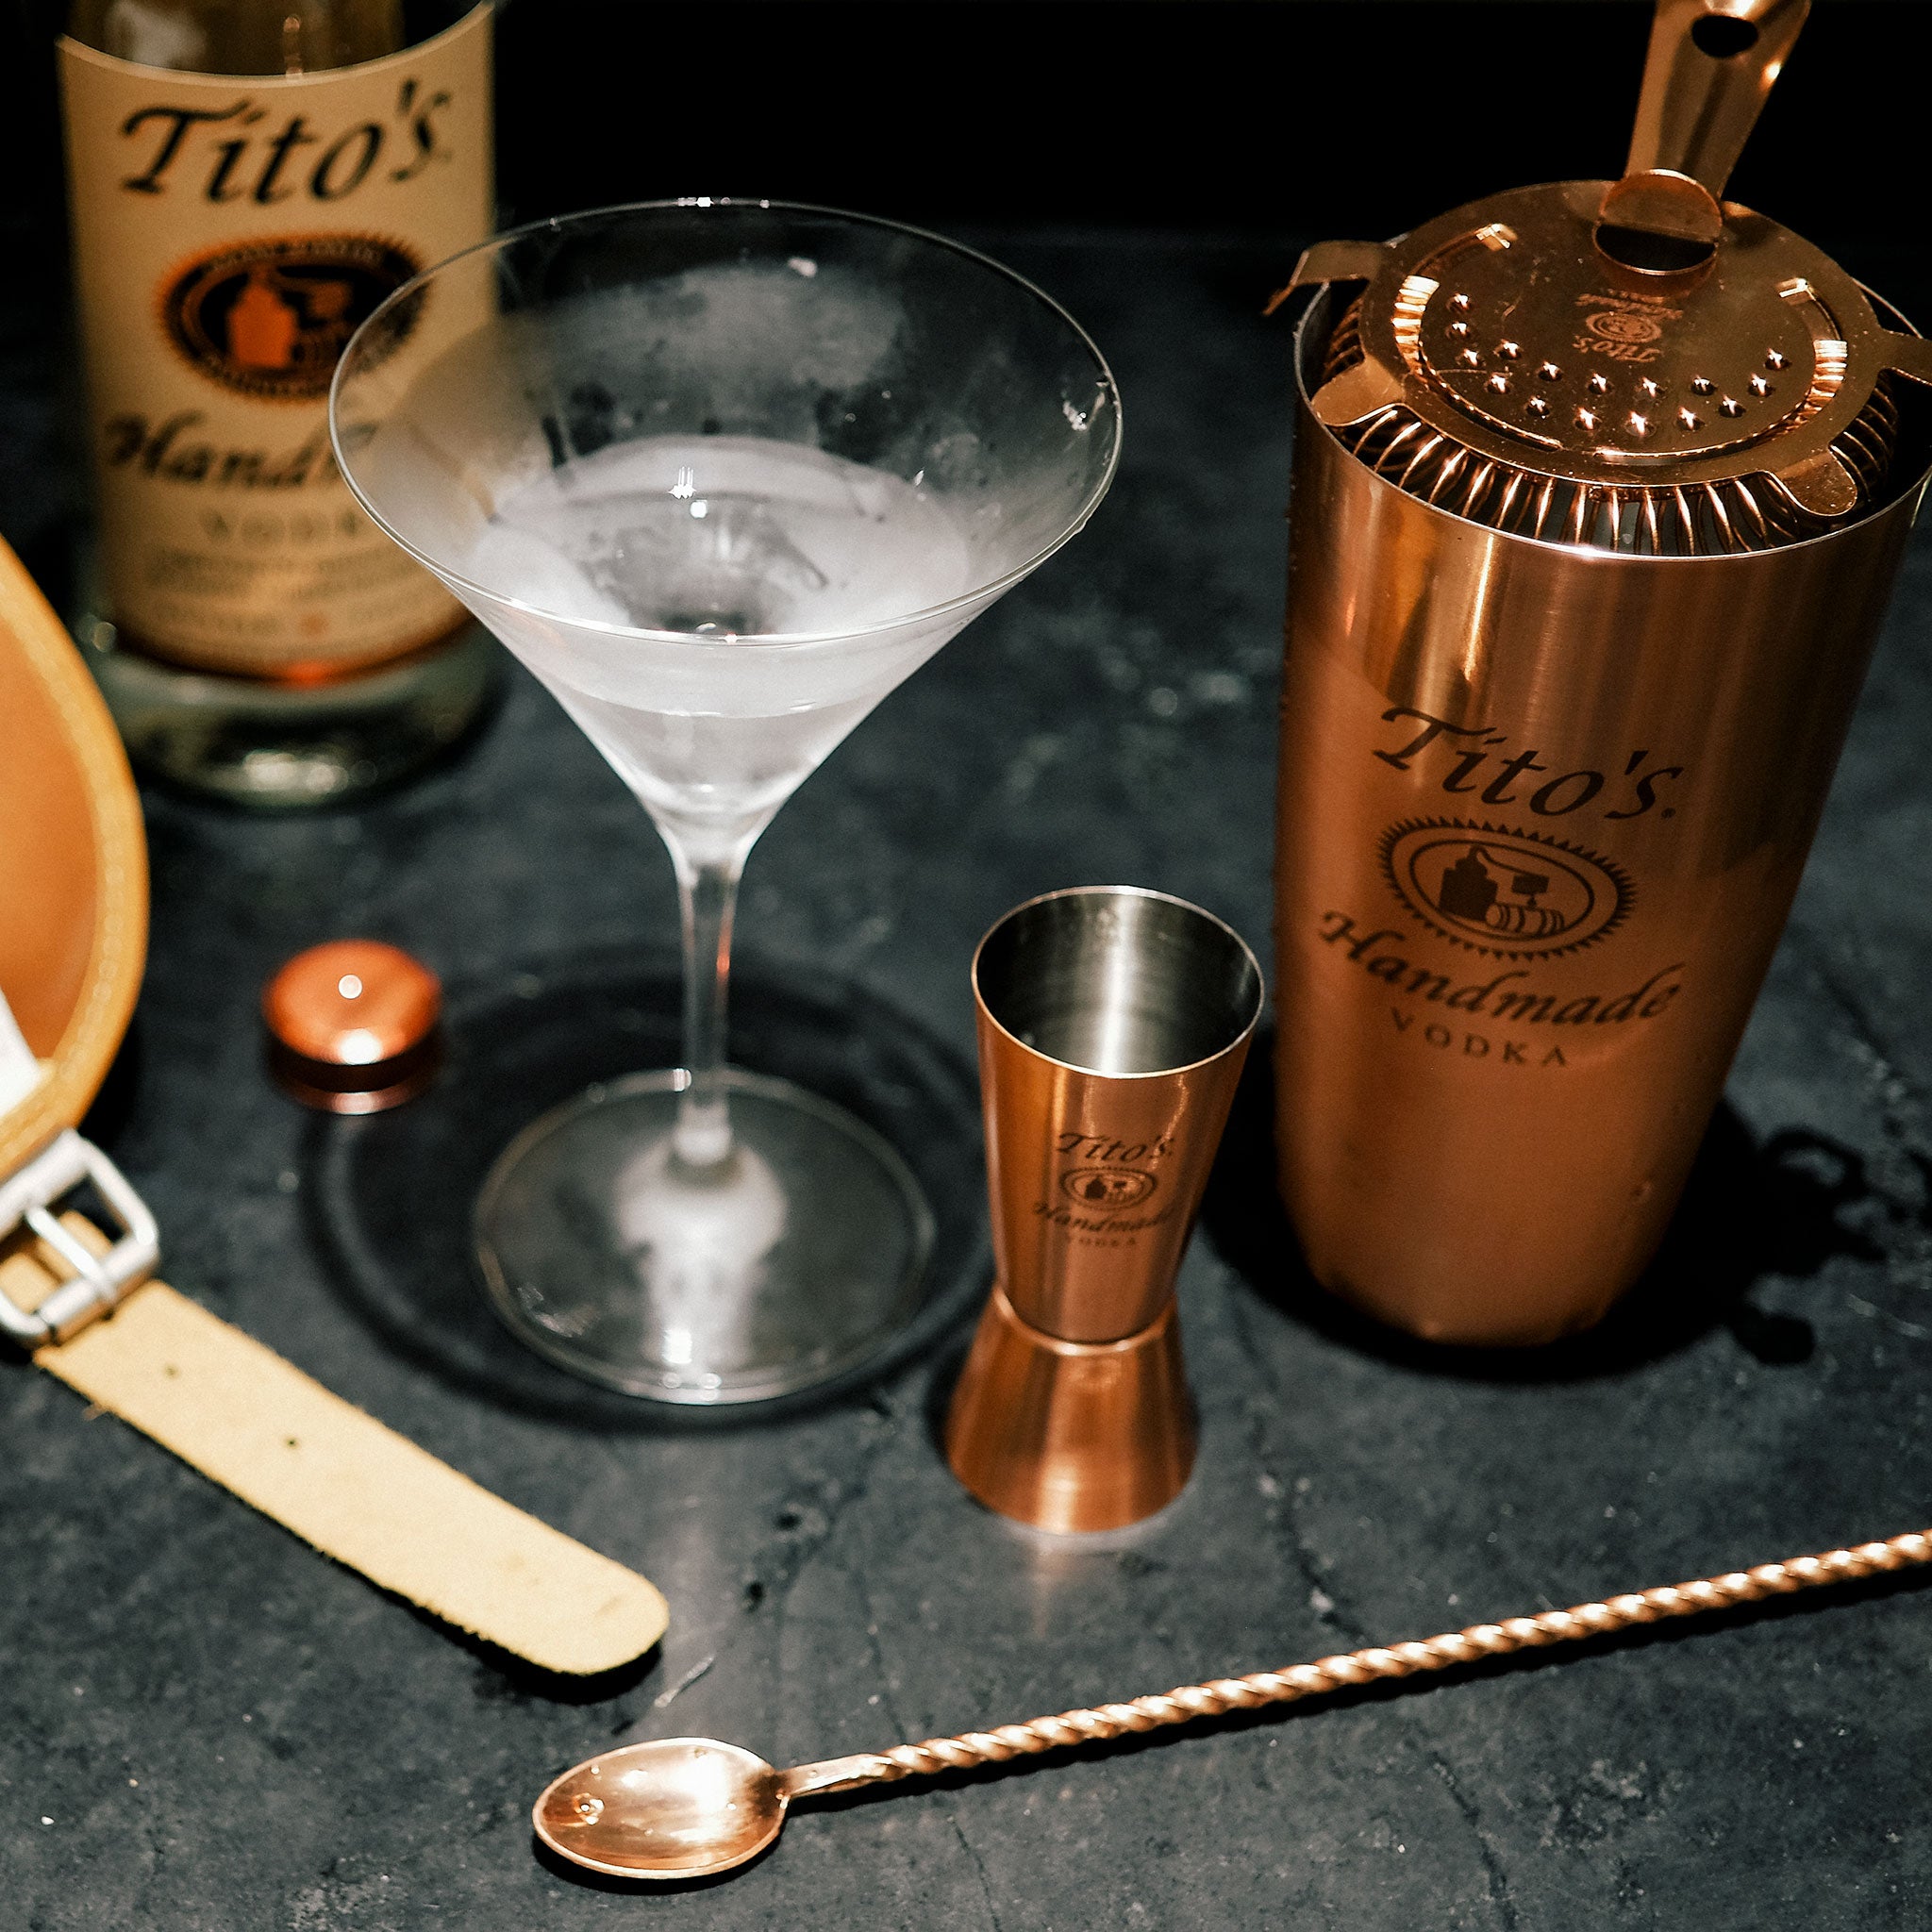 Tito's Handmade Vodka bottle with martini and copper bar tools